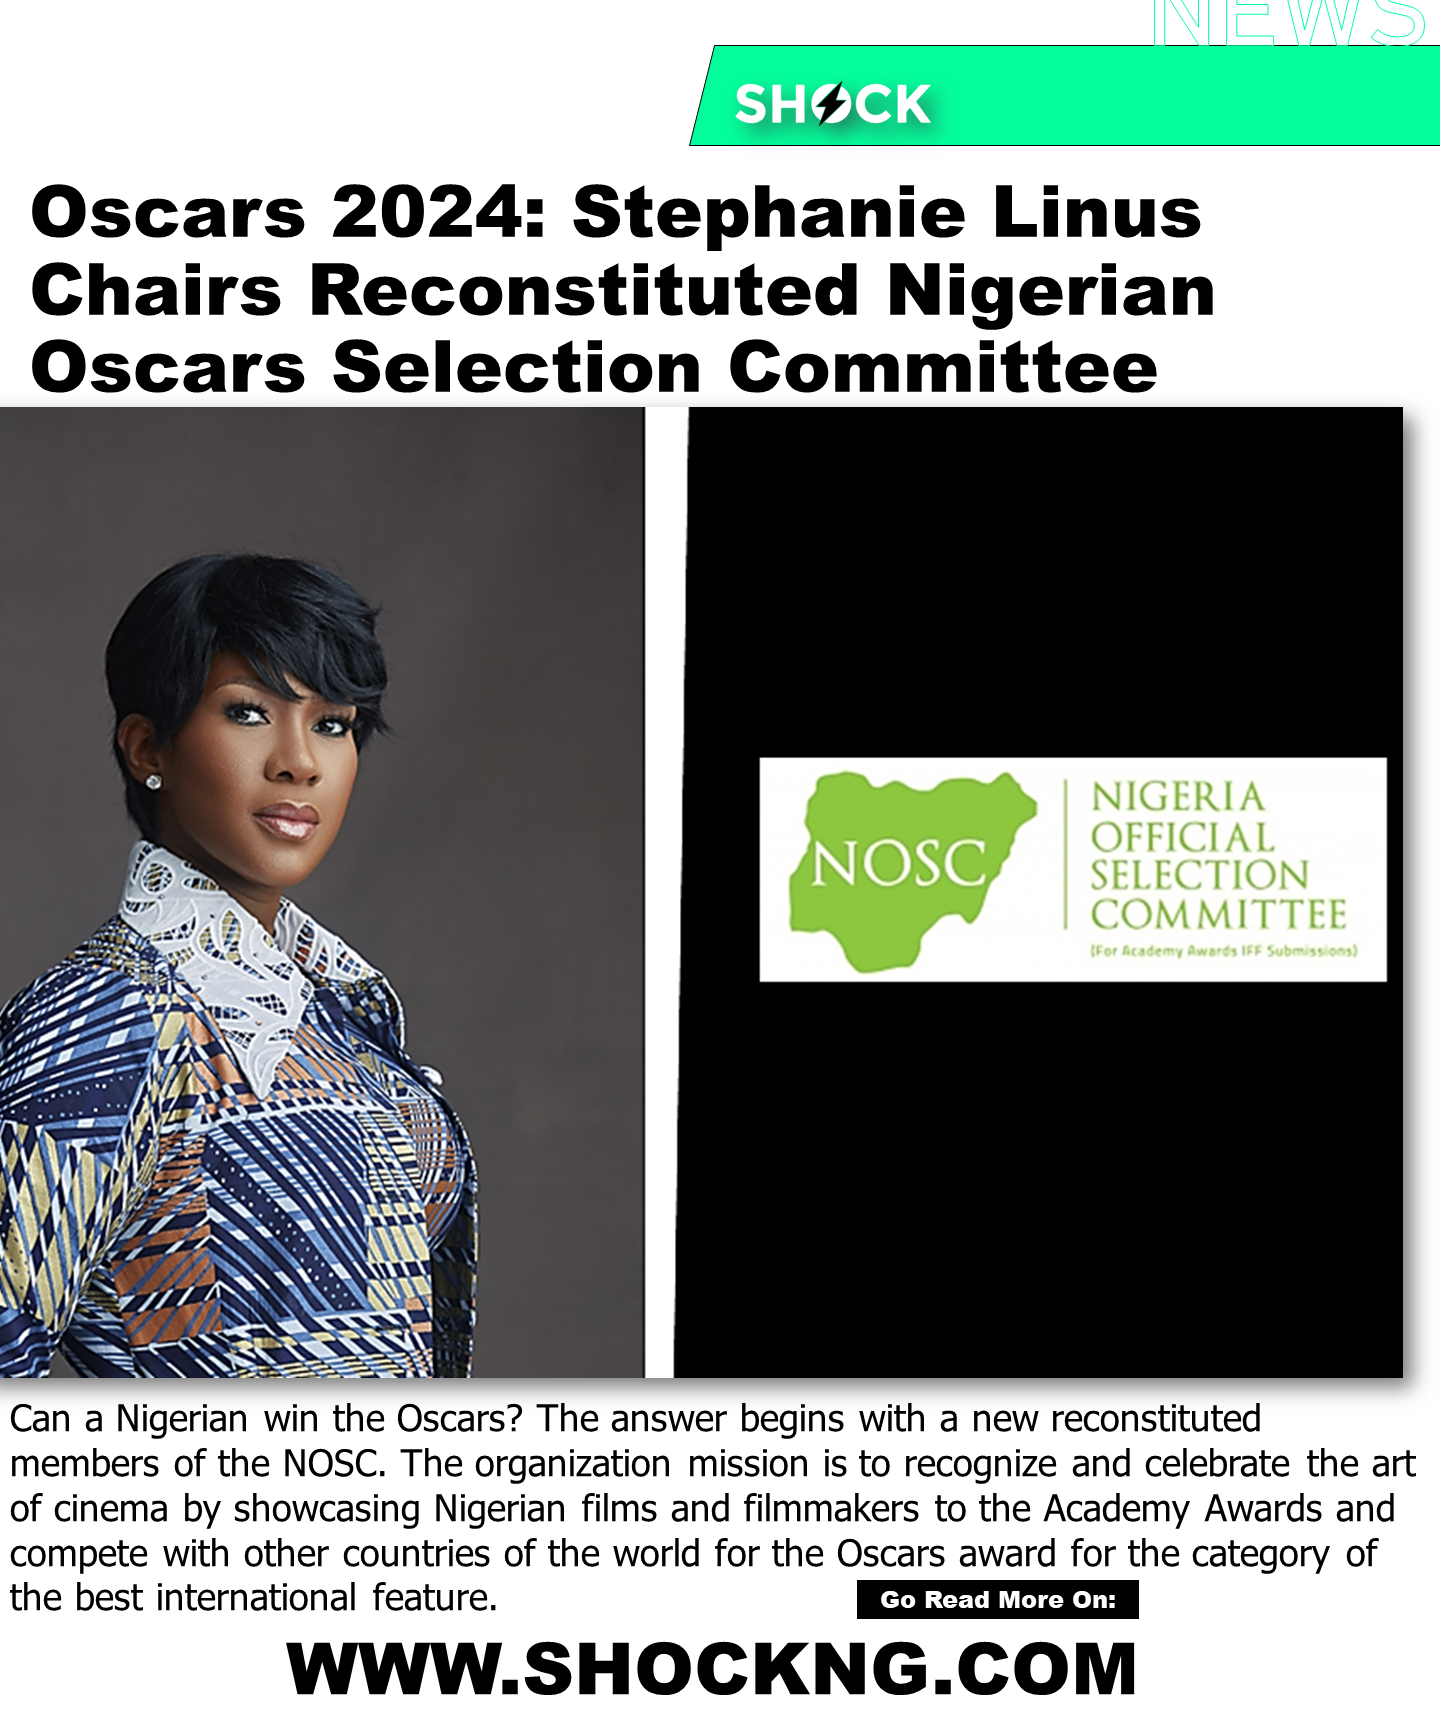 NOSC ne members 2023 - Oscars 2024: Meet The Newly Reconstituted NOSC 14 Member Chaired By Stephanie Linus